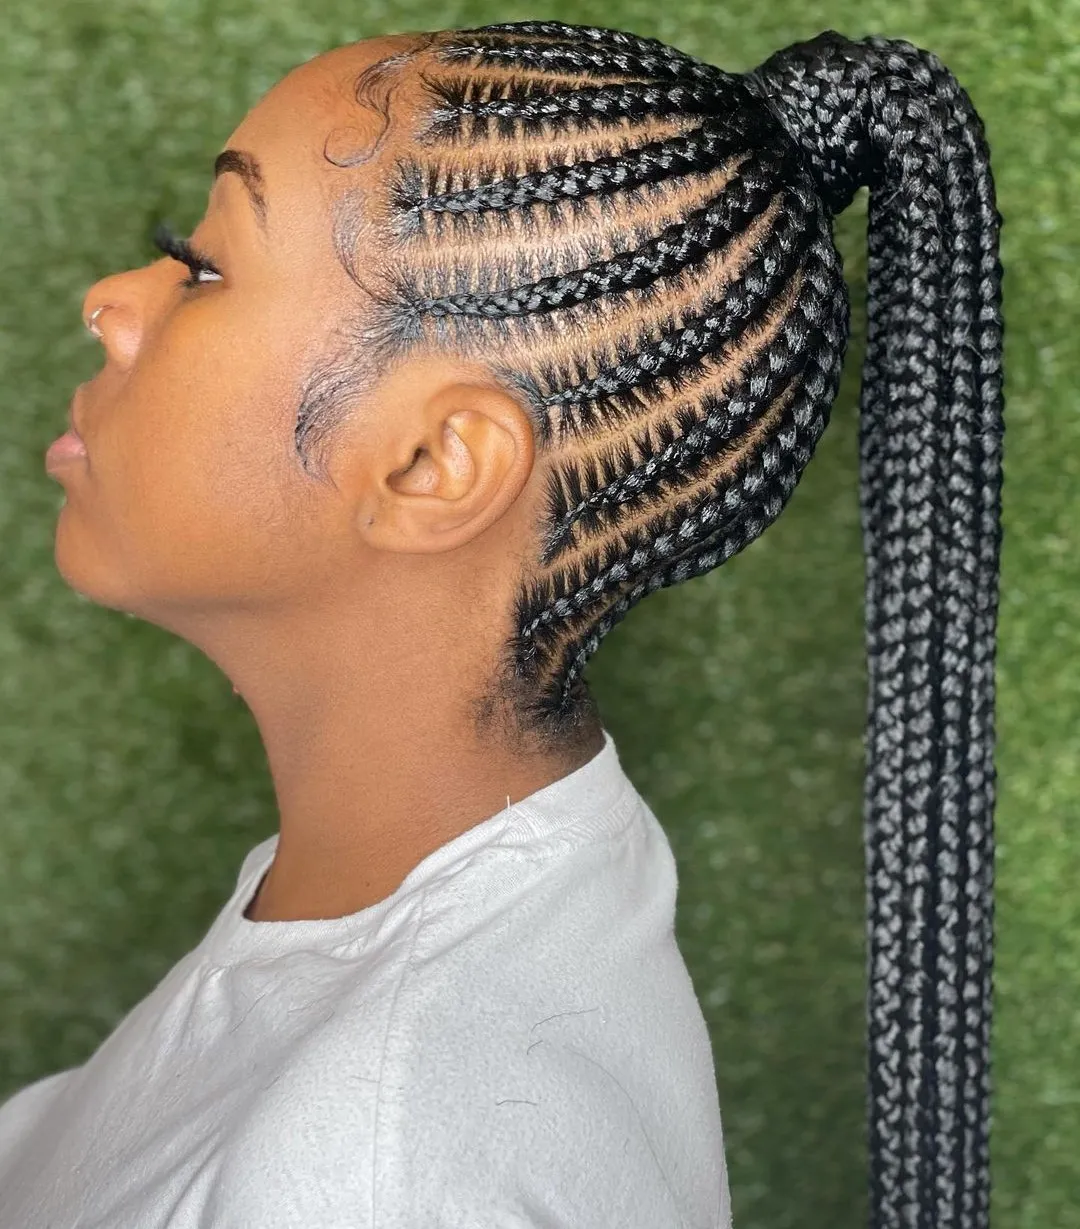 Top 10 African Hairstyles For Women - carnita